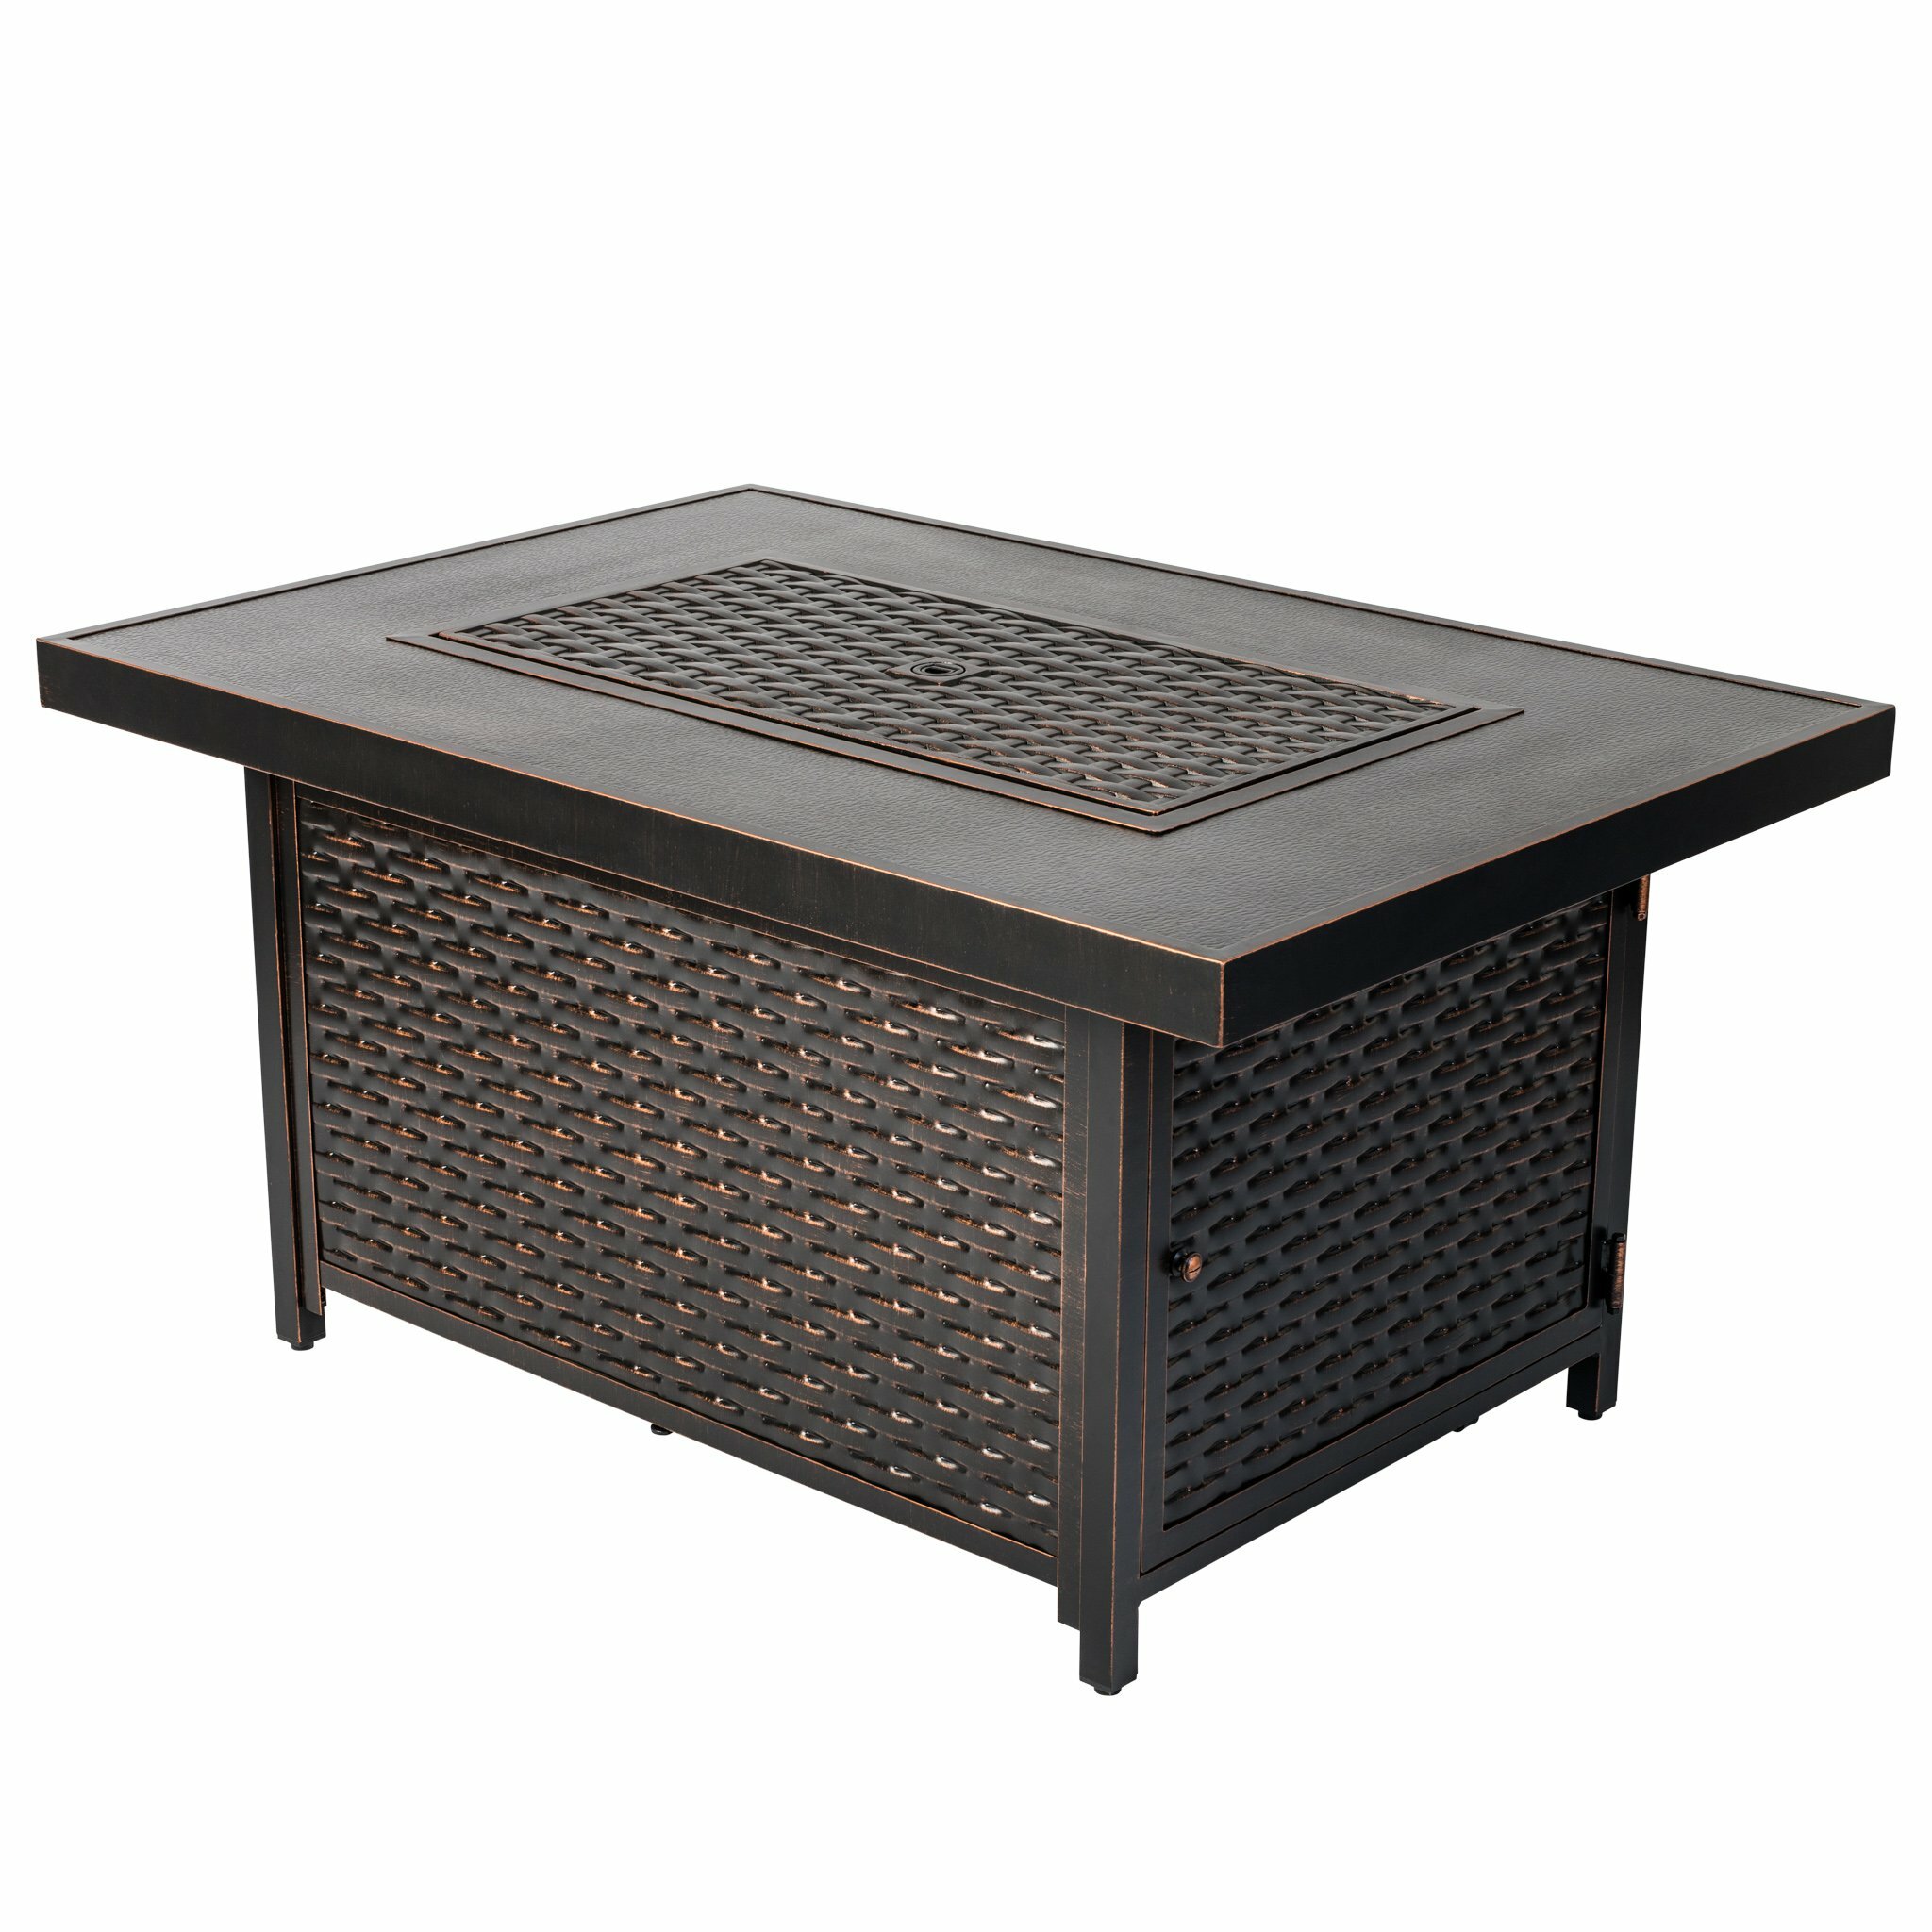 Wayfair Bronze Fire Pits You Ll Love In 2021